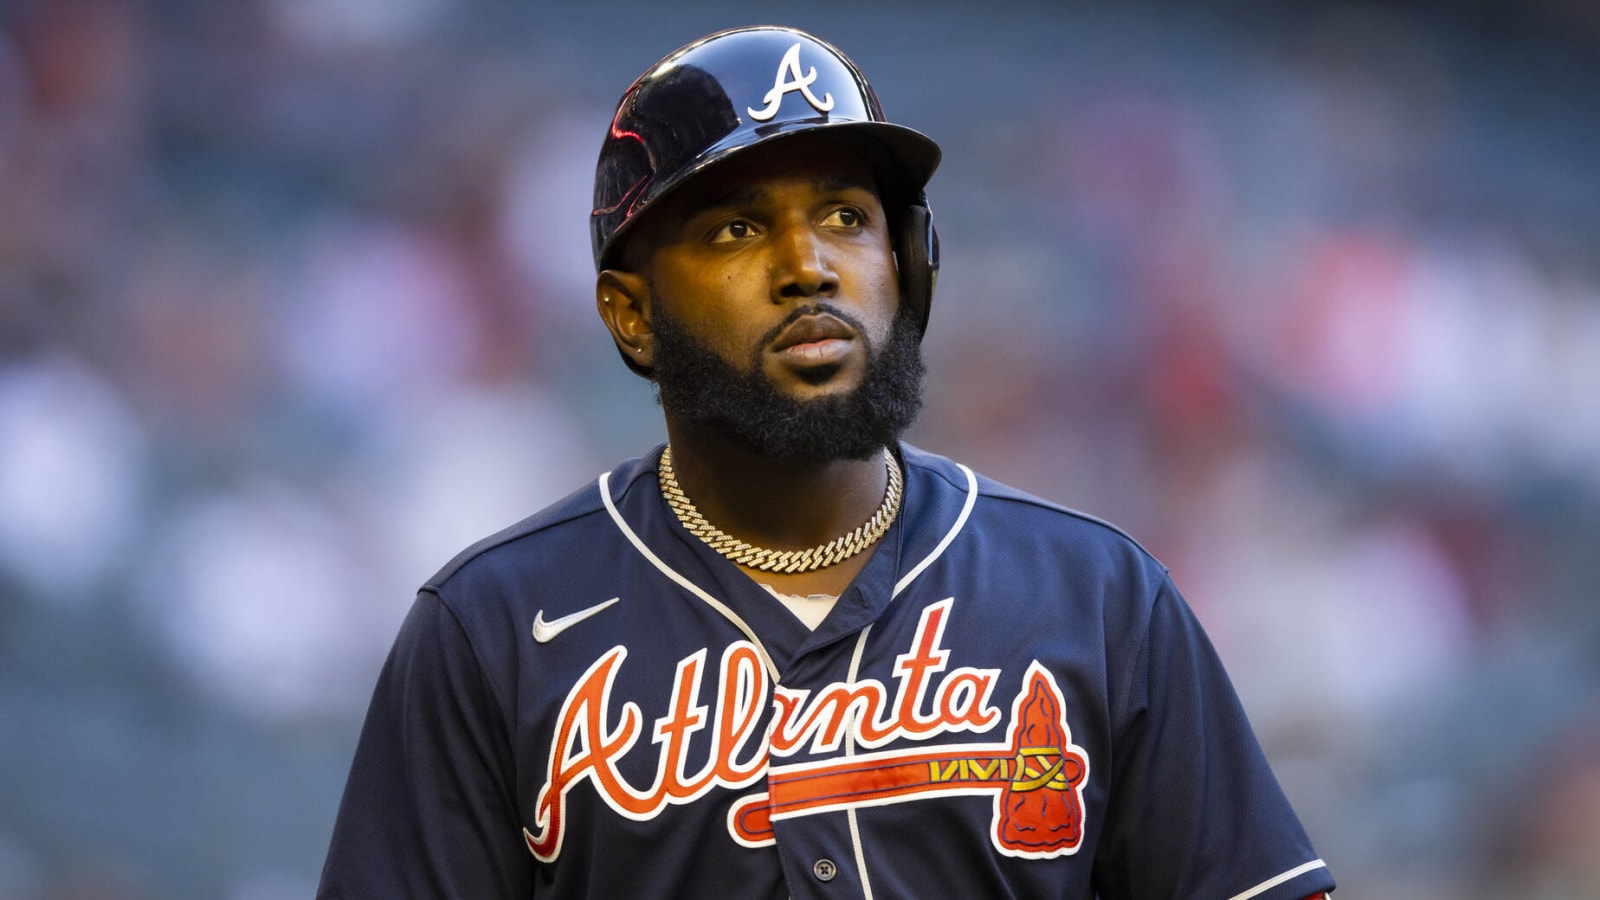 Atlanta Braves outfielder Marcell Ozuna arrested for DUI in